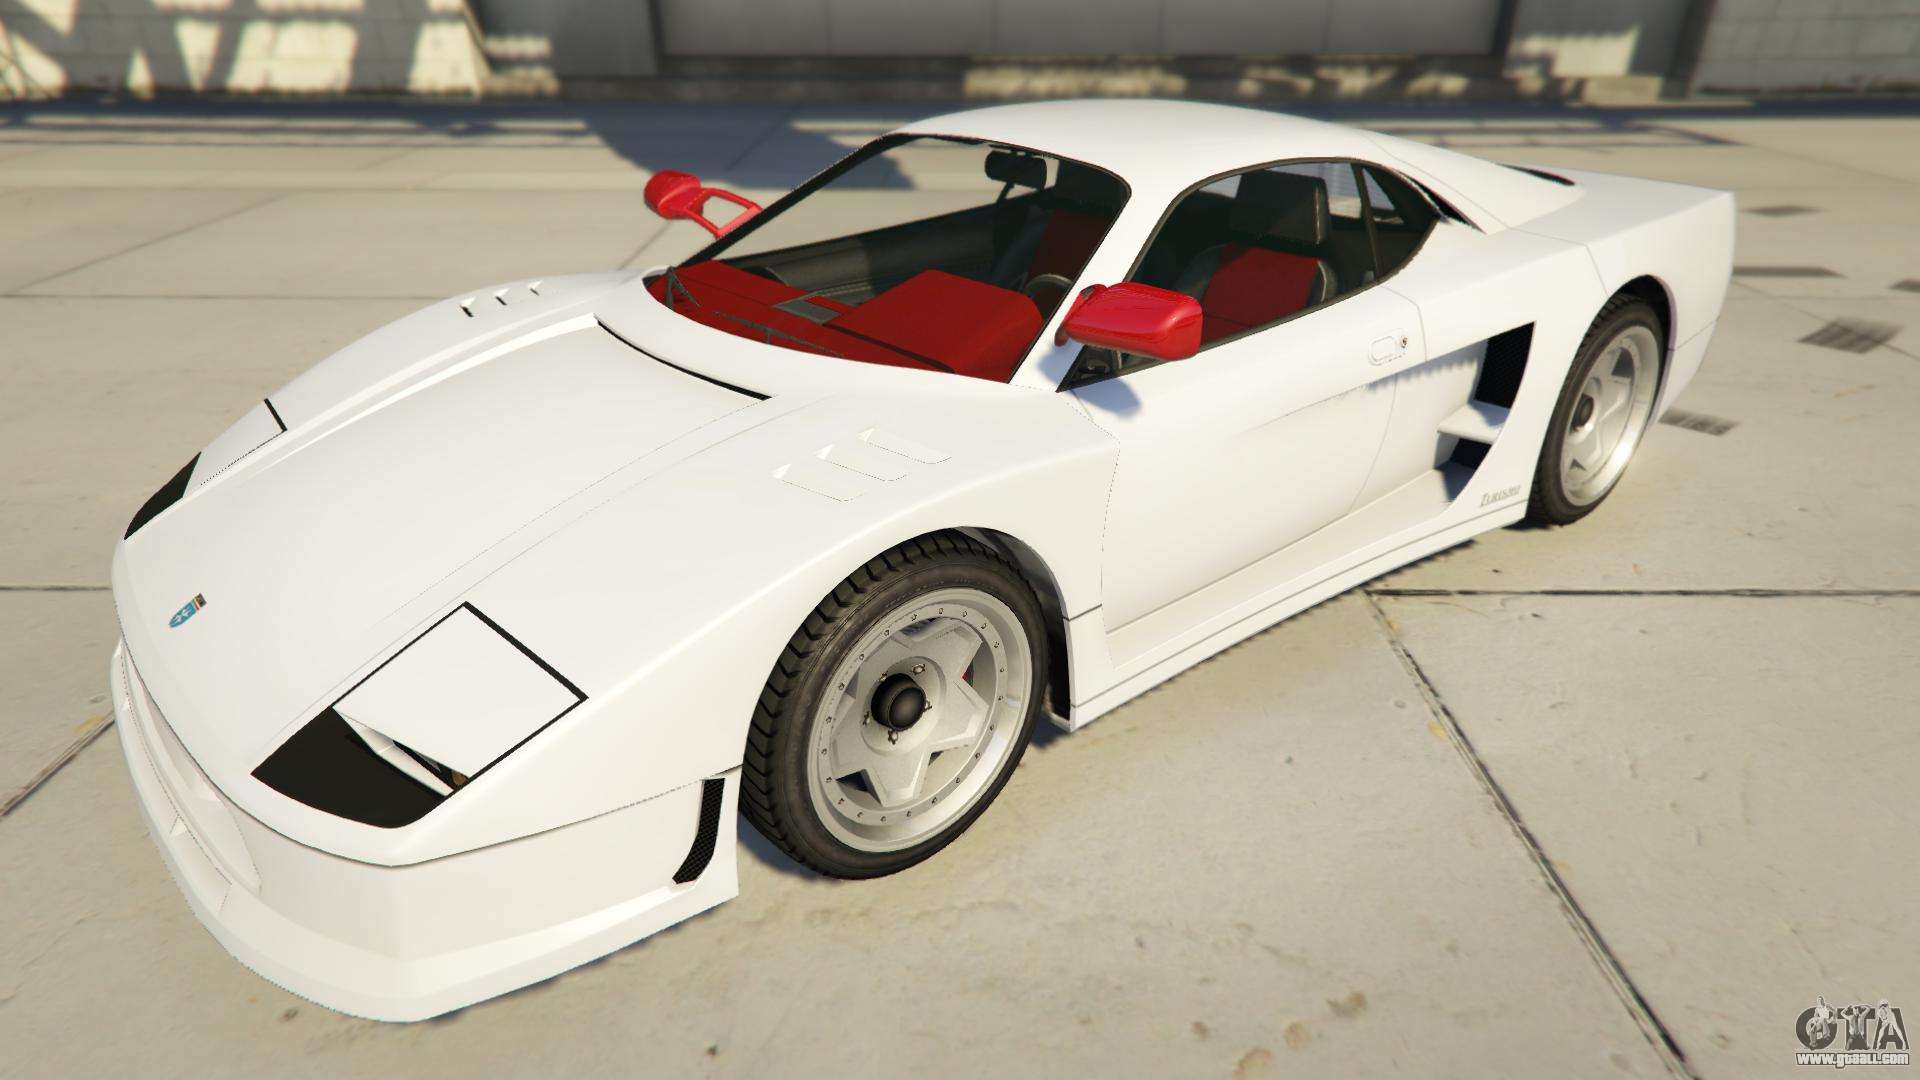 Grotti Turismo Classic from GTA Online